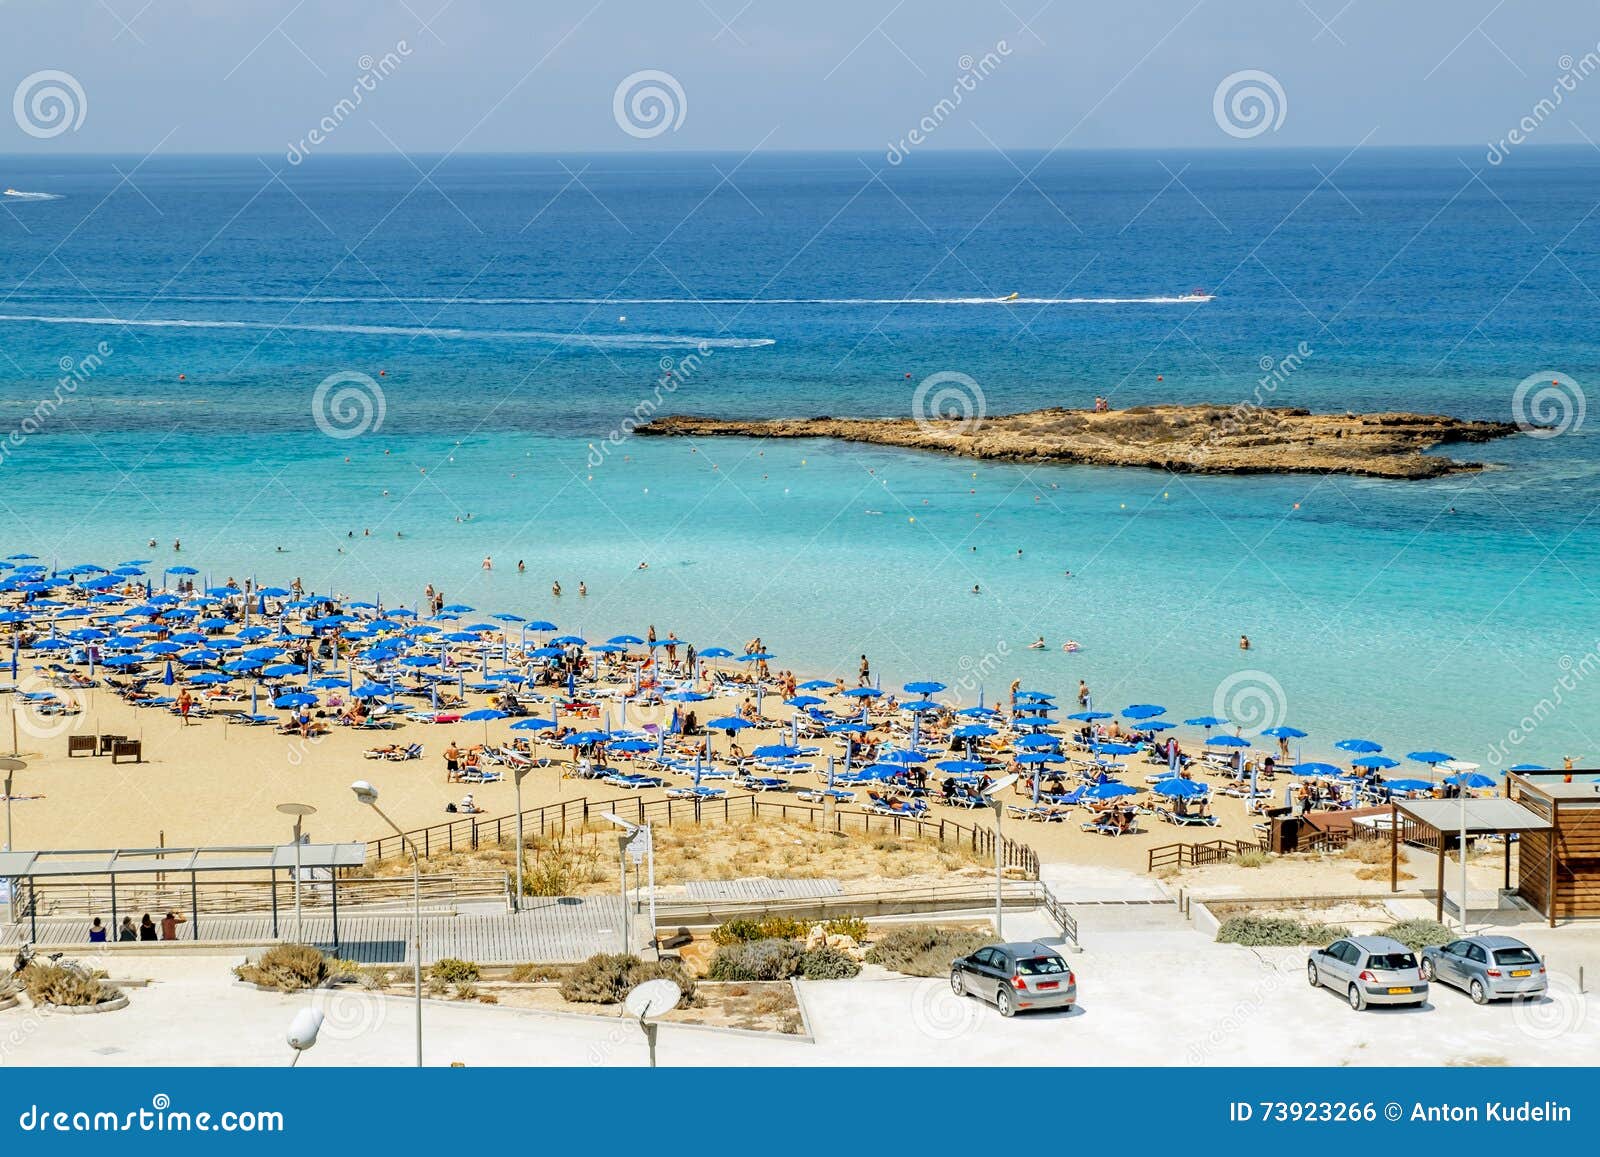 Hotels and Beach at Fig Tree Bay in Protaras Photo - Image of cyprus: 73923266